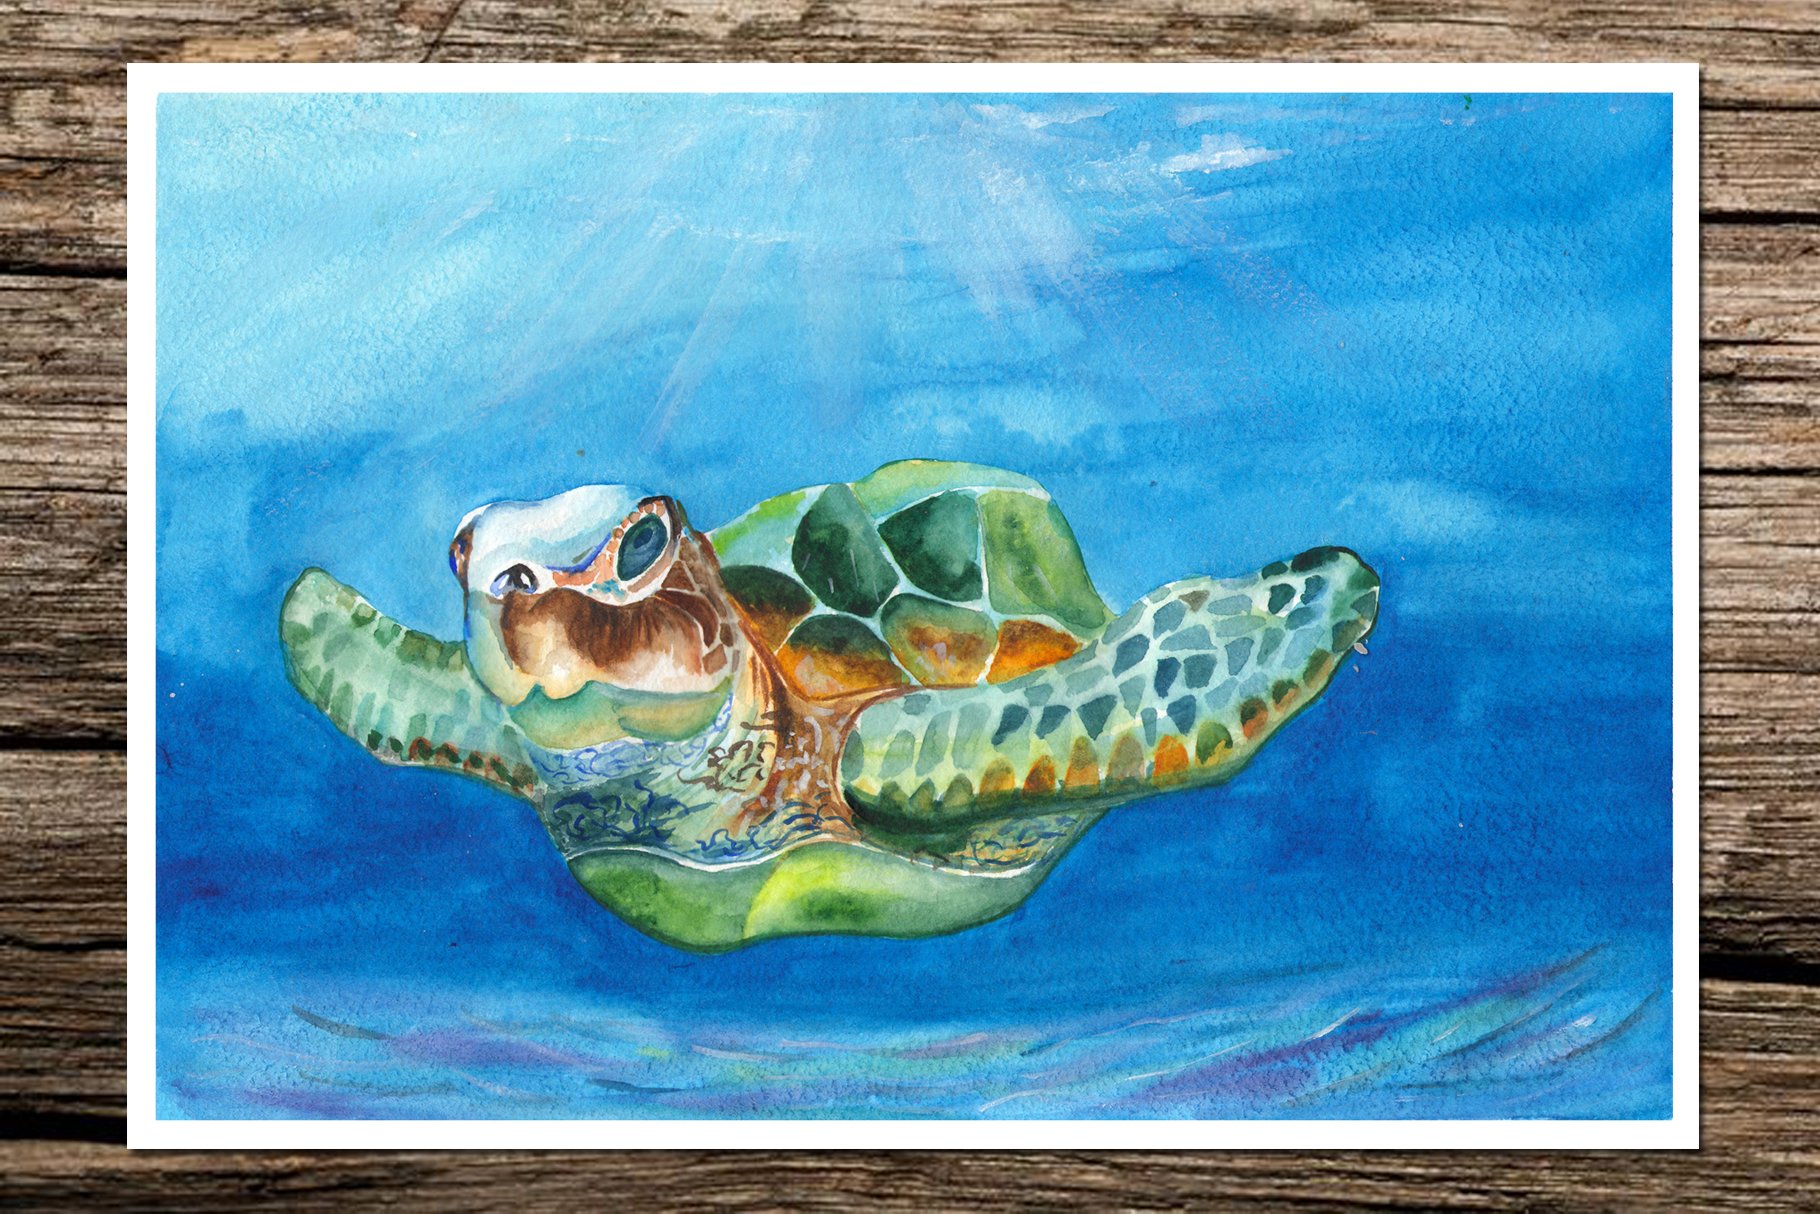 Swimming turtle on a poster.